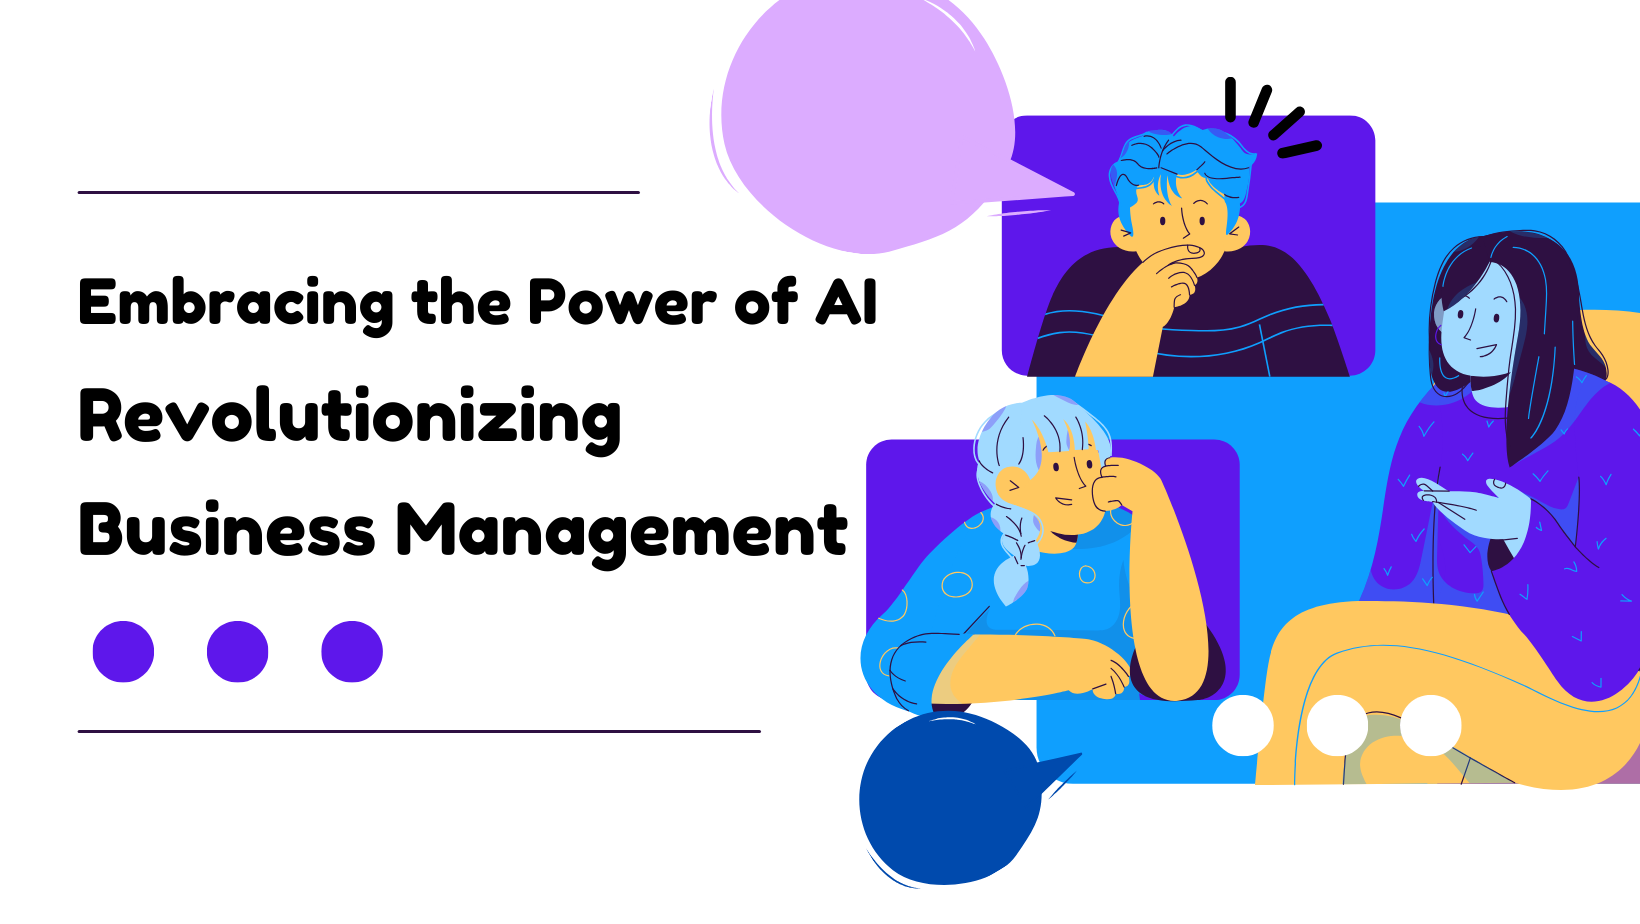 Embracing the Power of AI